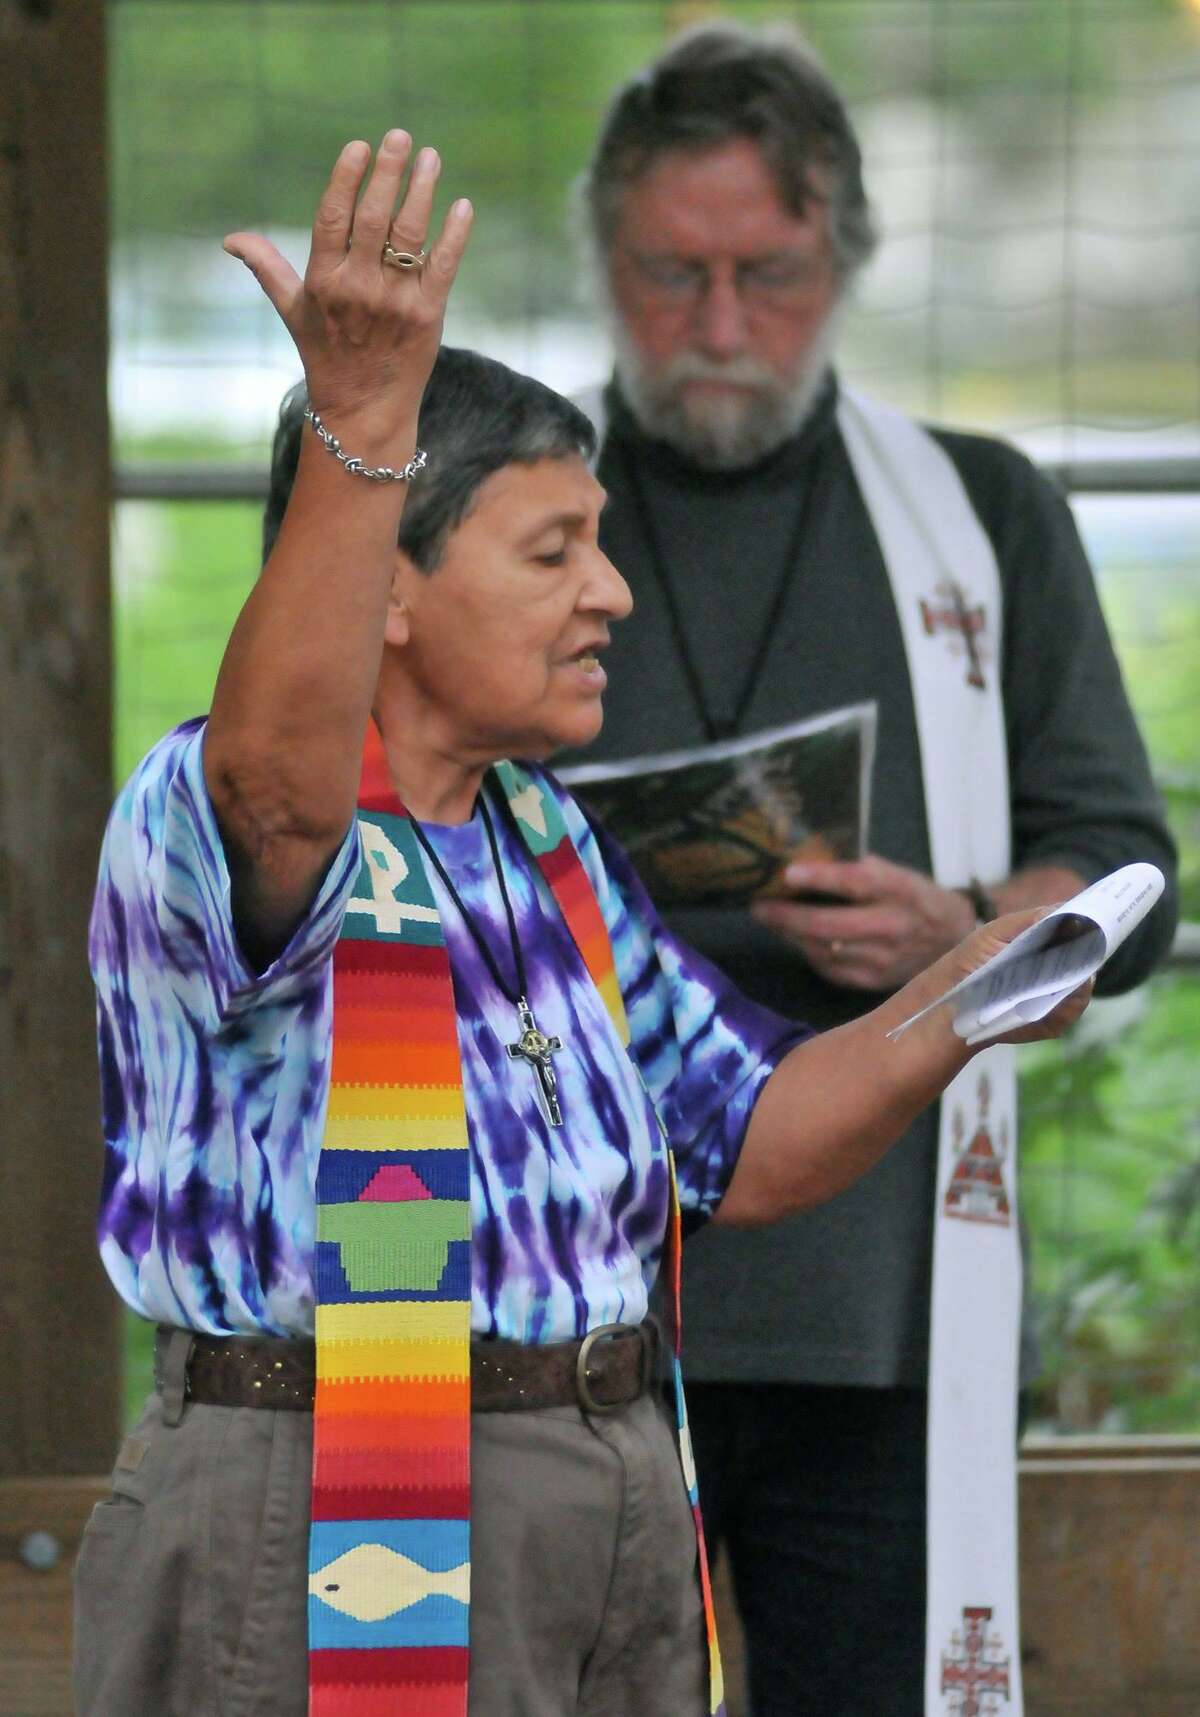 Nickie Valdez, the co-founder and president of Dignity San Antonio, leads a reading at Beacon Hill Presbyterian Church in 2012. Valdez, 80, died Dec. 25, 2020, after an eight-year battle with multiple myeloma.